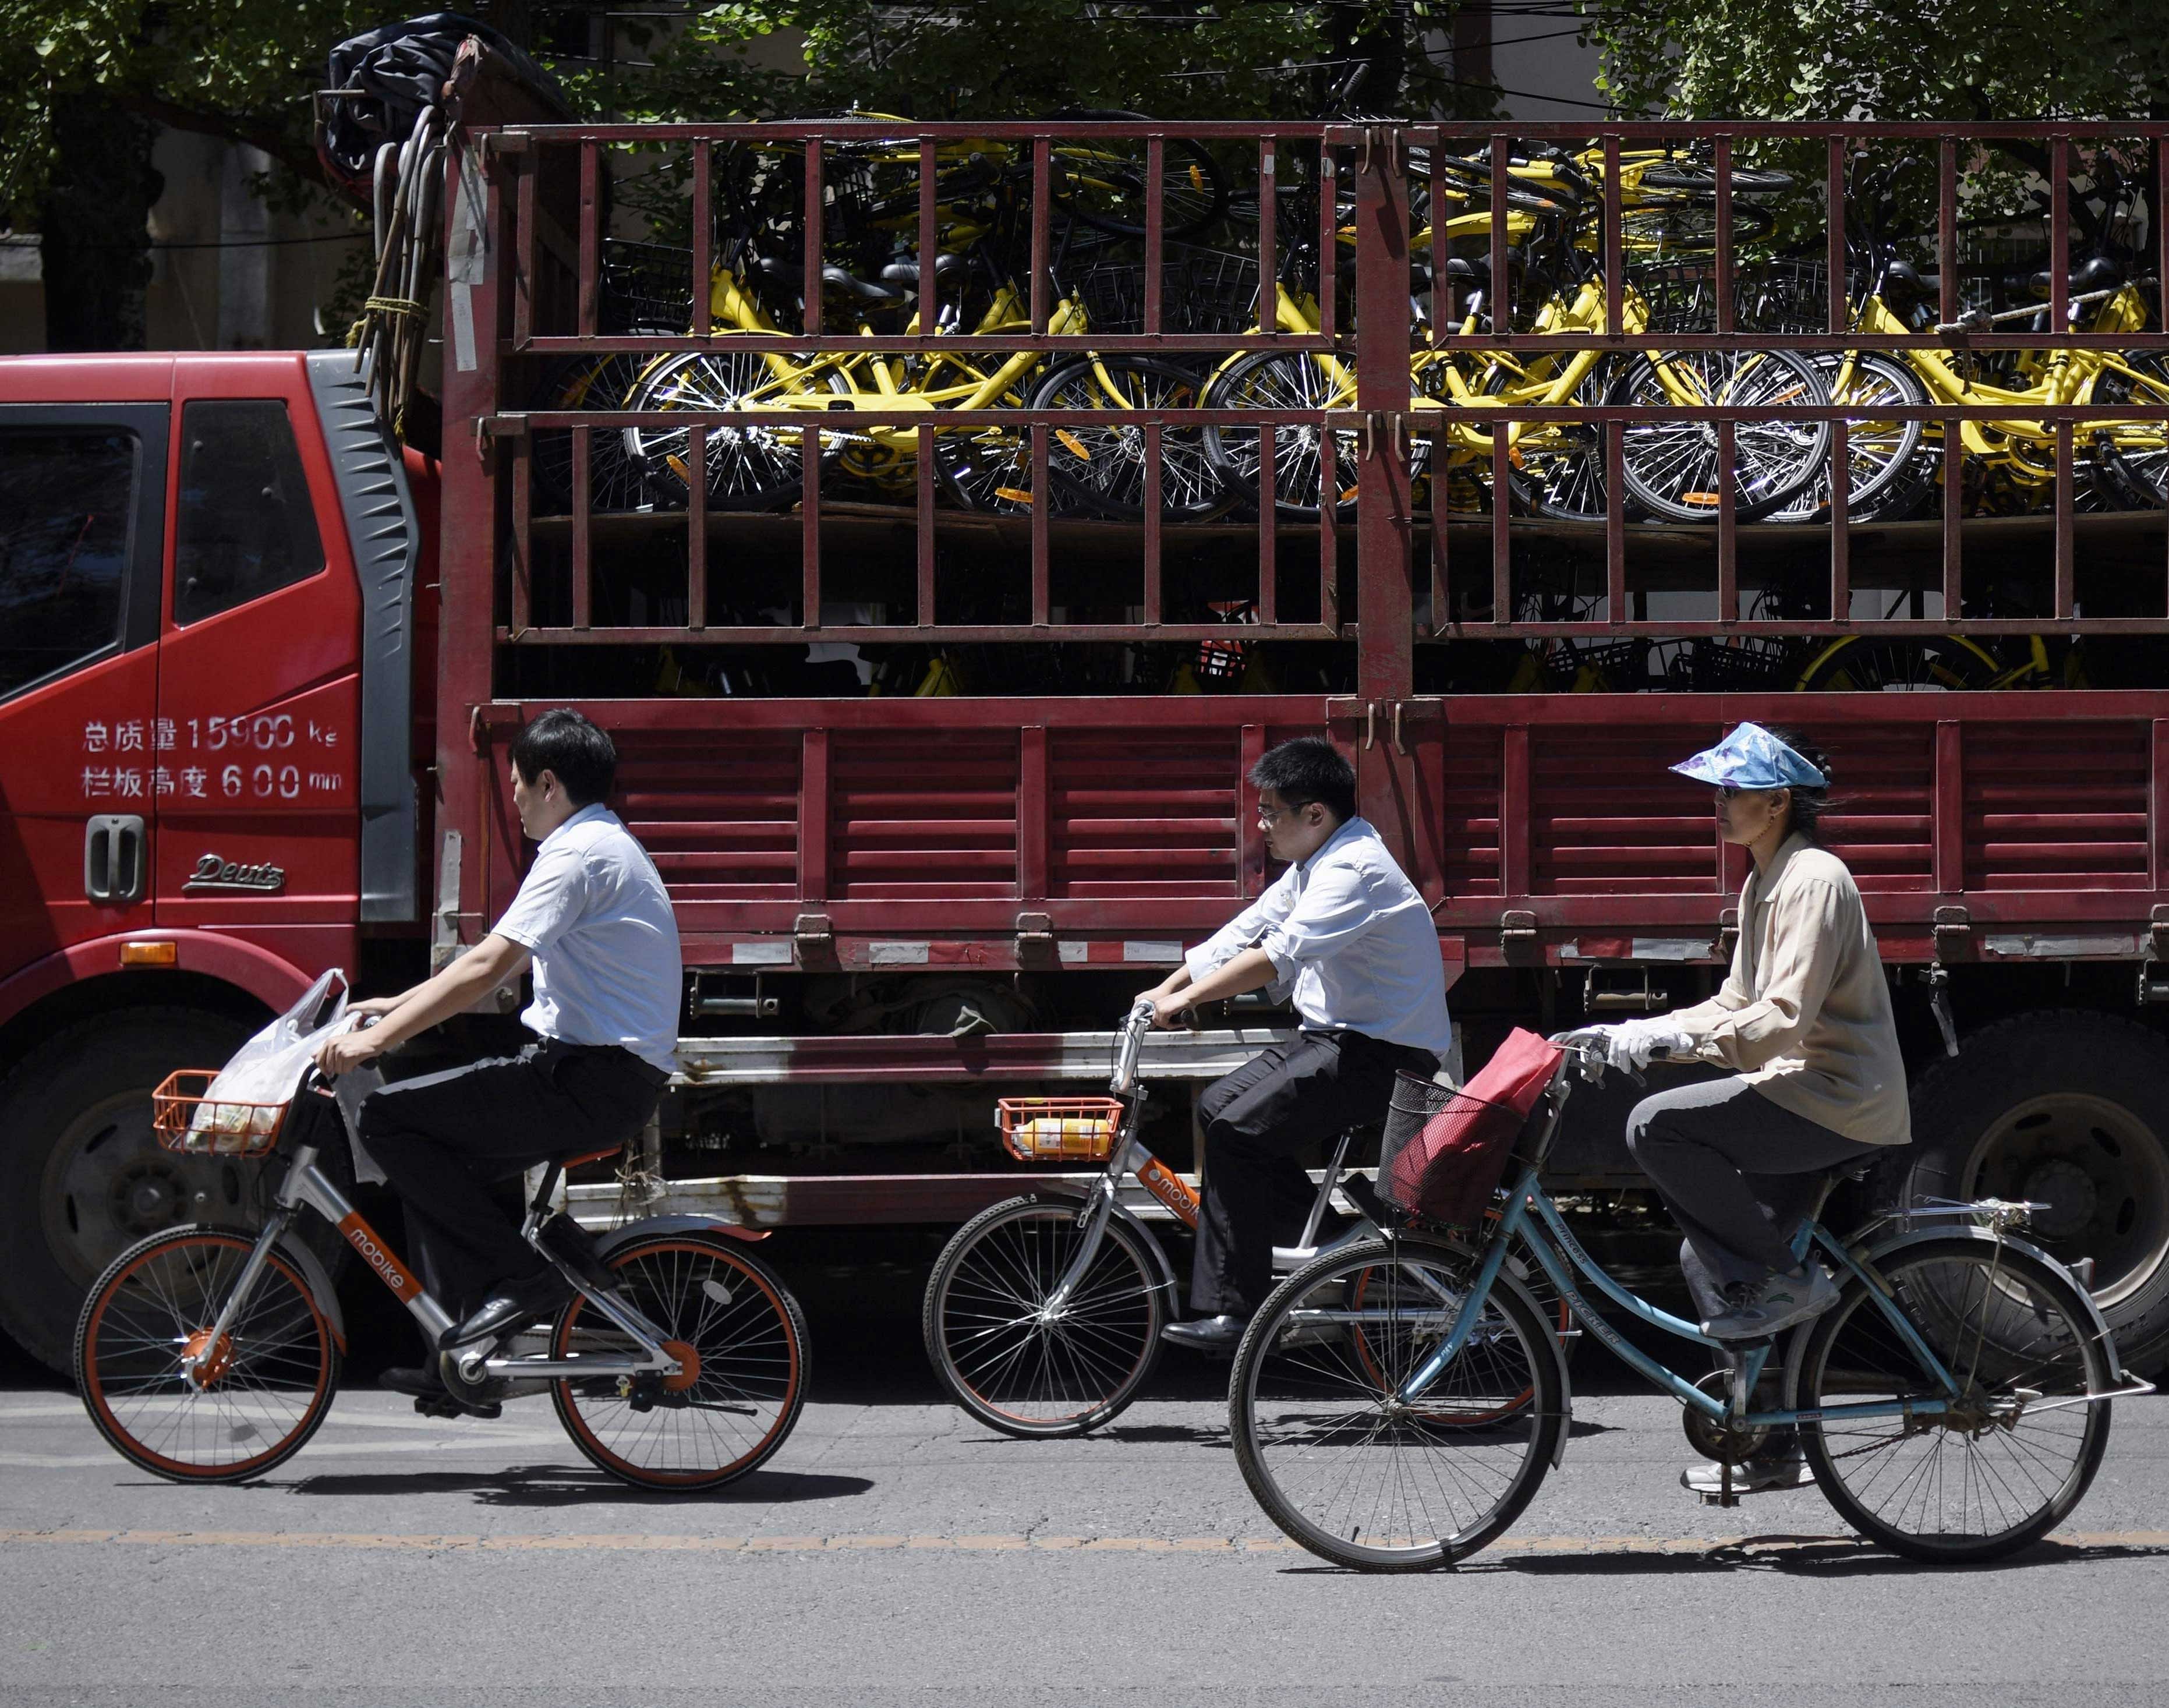 While a boom in bike-sharing has blanketed city streets with unused bicycles, today, Chinese startups want to share umbrellas, mobile phone power banks and basketballs. Reuters image..